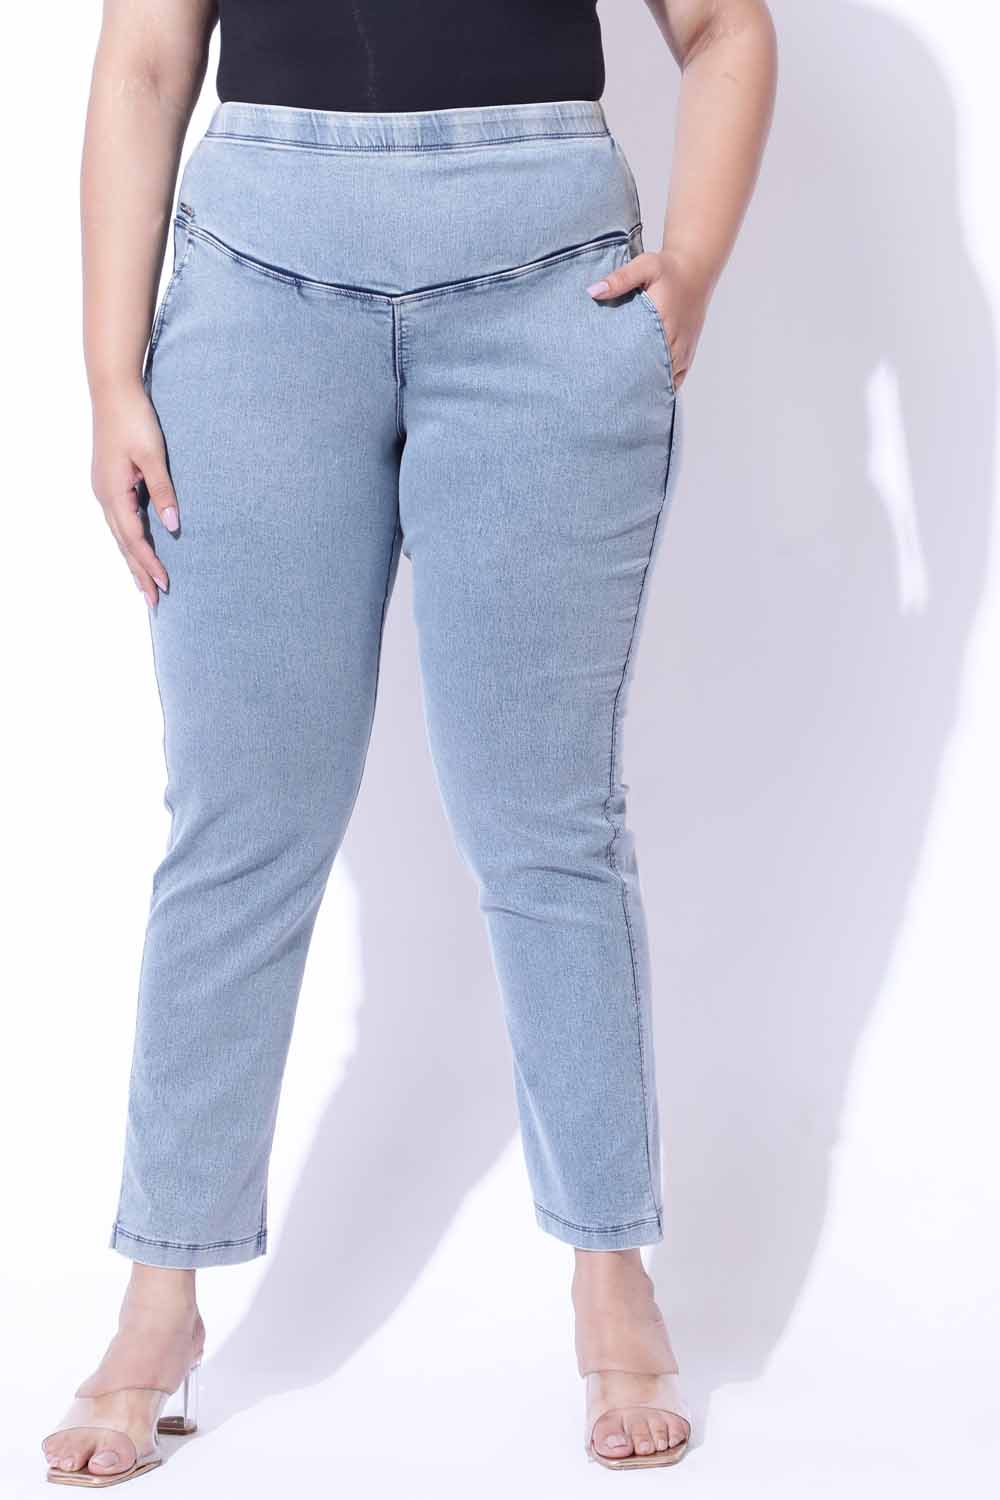 SLATIOM Women's Washed Loose Stretch Pants Women's Trousers Jeans Plus Size  Jeans (Color : A, Size : XL Code) : : Clothing, Shoes & Accessories